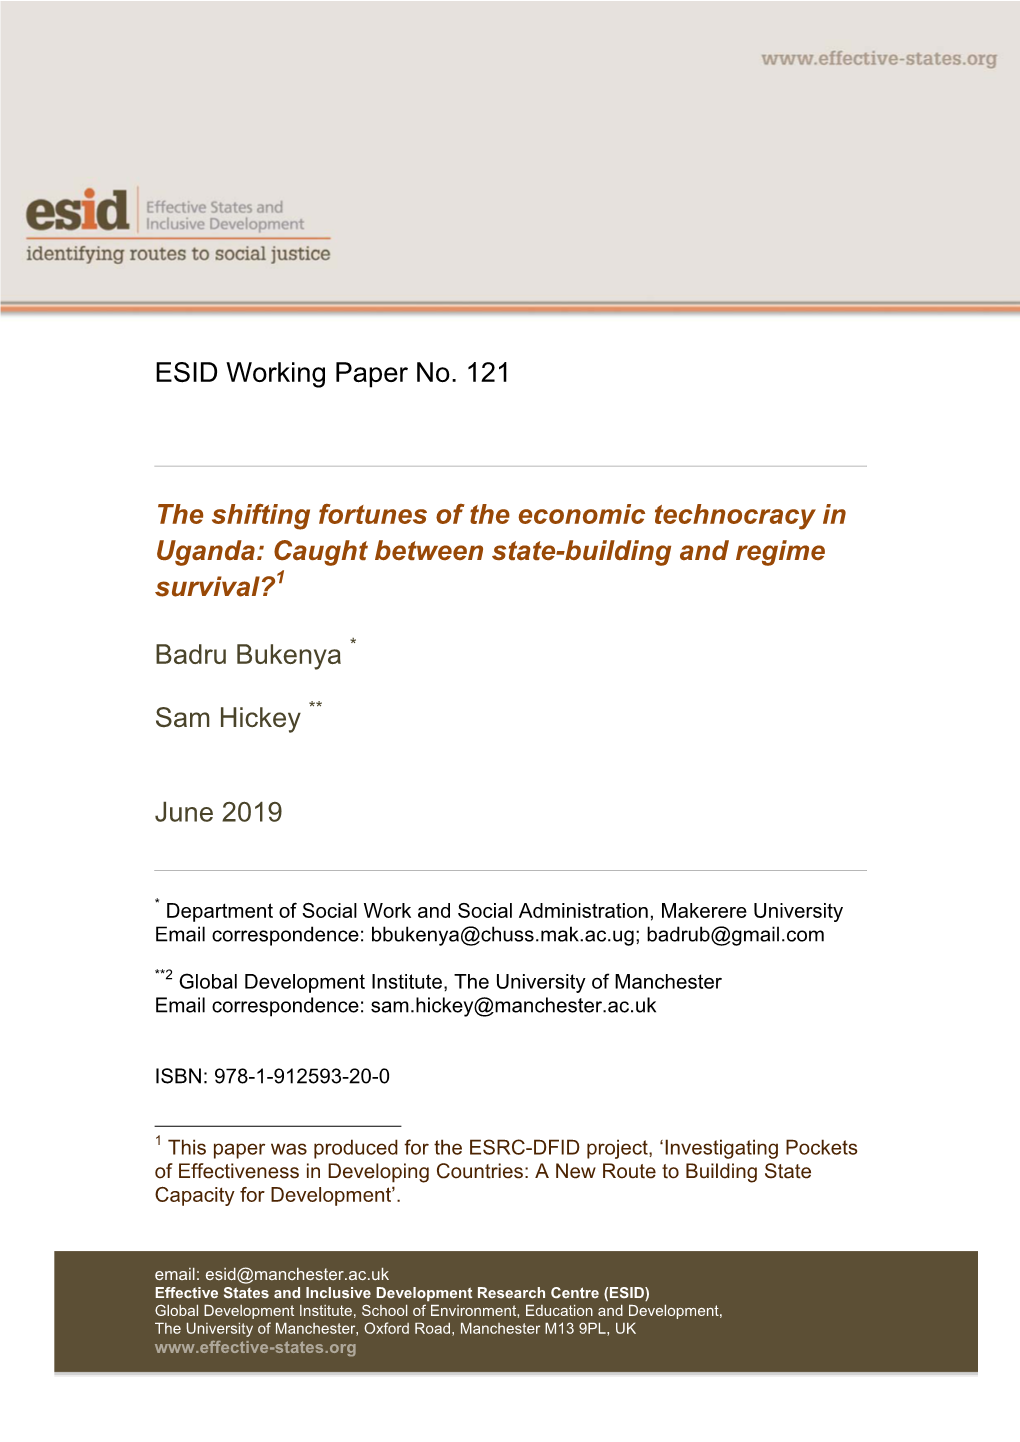 ESID Working Paper No. 121 the Shifting Fortunes of the Economic